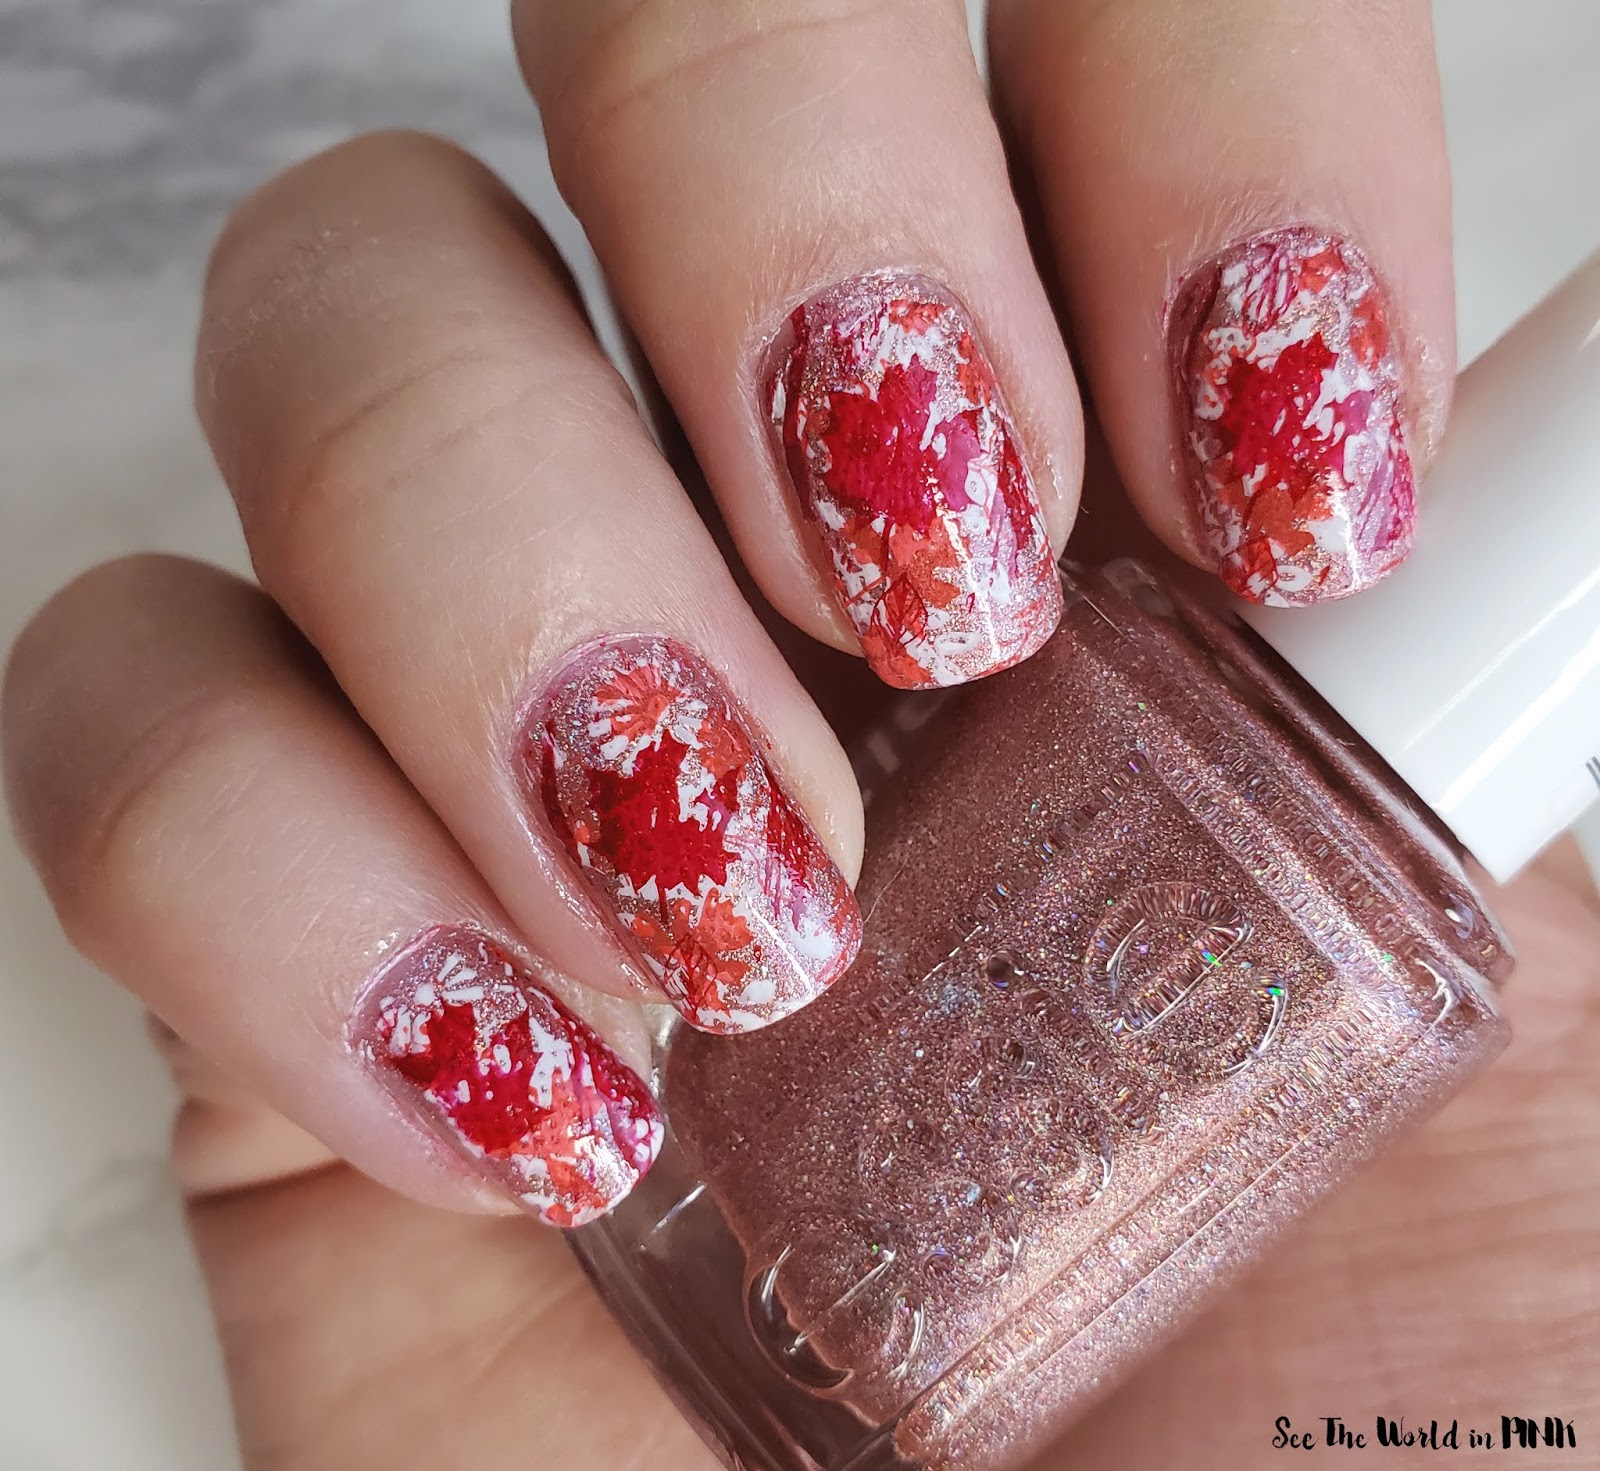 Manicure Monday - Fall Stamped Nails and Essie Gorge-ous Geodes 